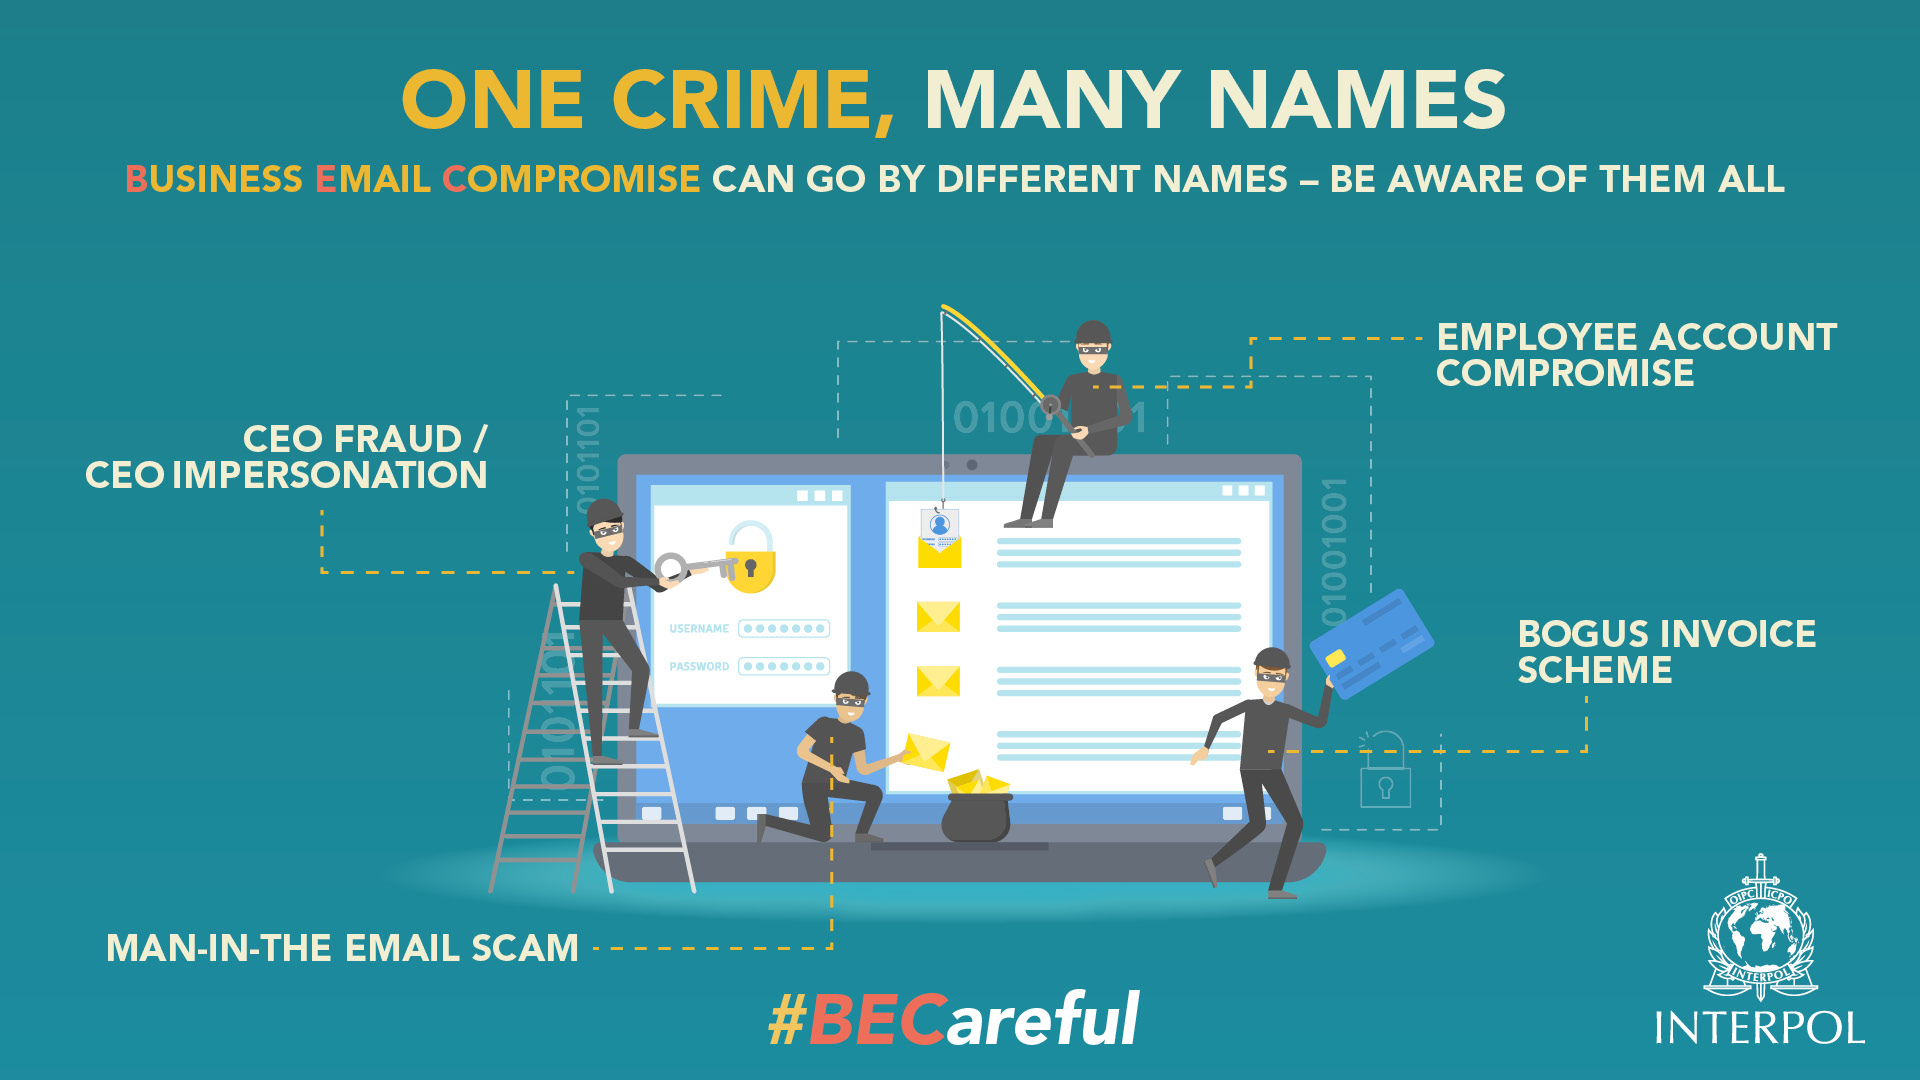 Scam Basics - Business Email Compromise Fraud 2